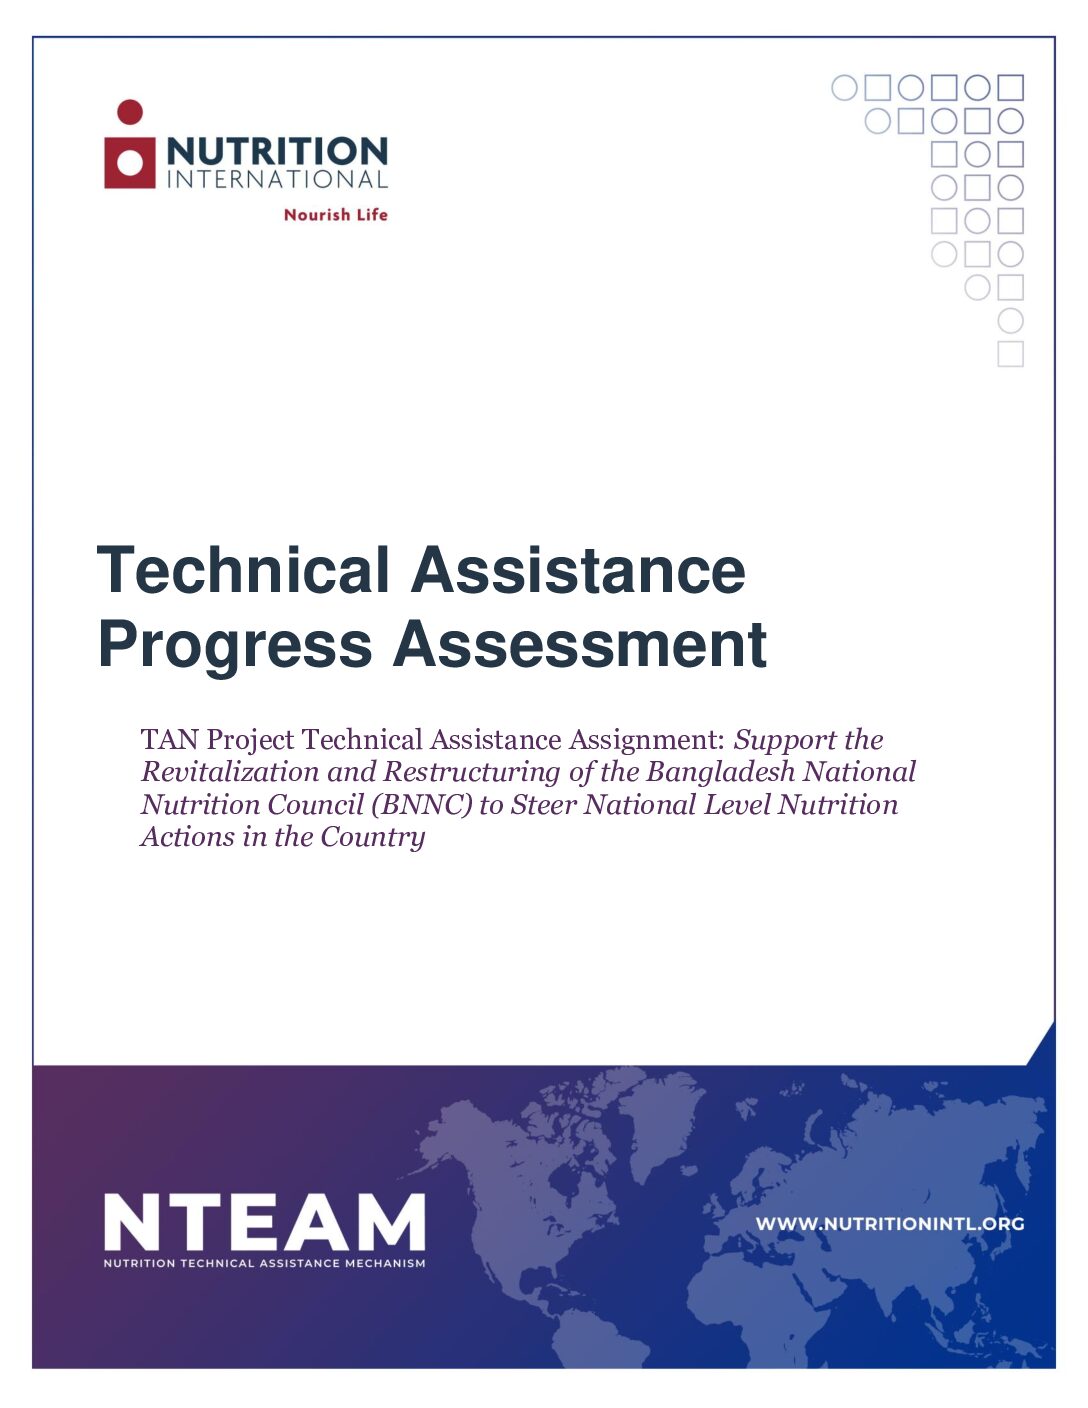 NTEAM’s Progress Assessment of TAN’s Technical Assistance Assignment in Bangladesh: Support the Revitalization and Restructuring of the Bangladesh National Nutrition Council to Steer National Level Nutrition Actions in the Country thumbnail